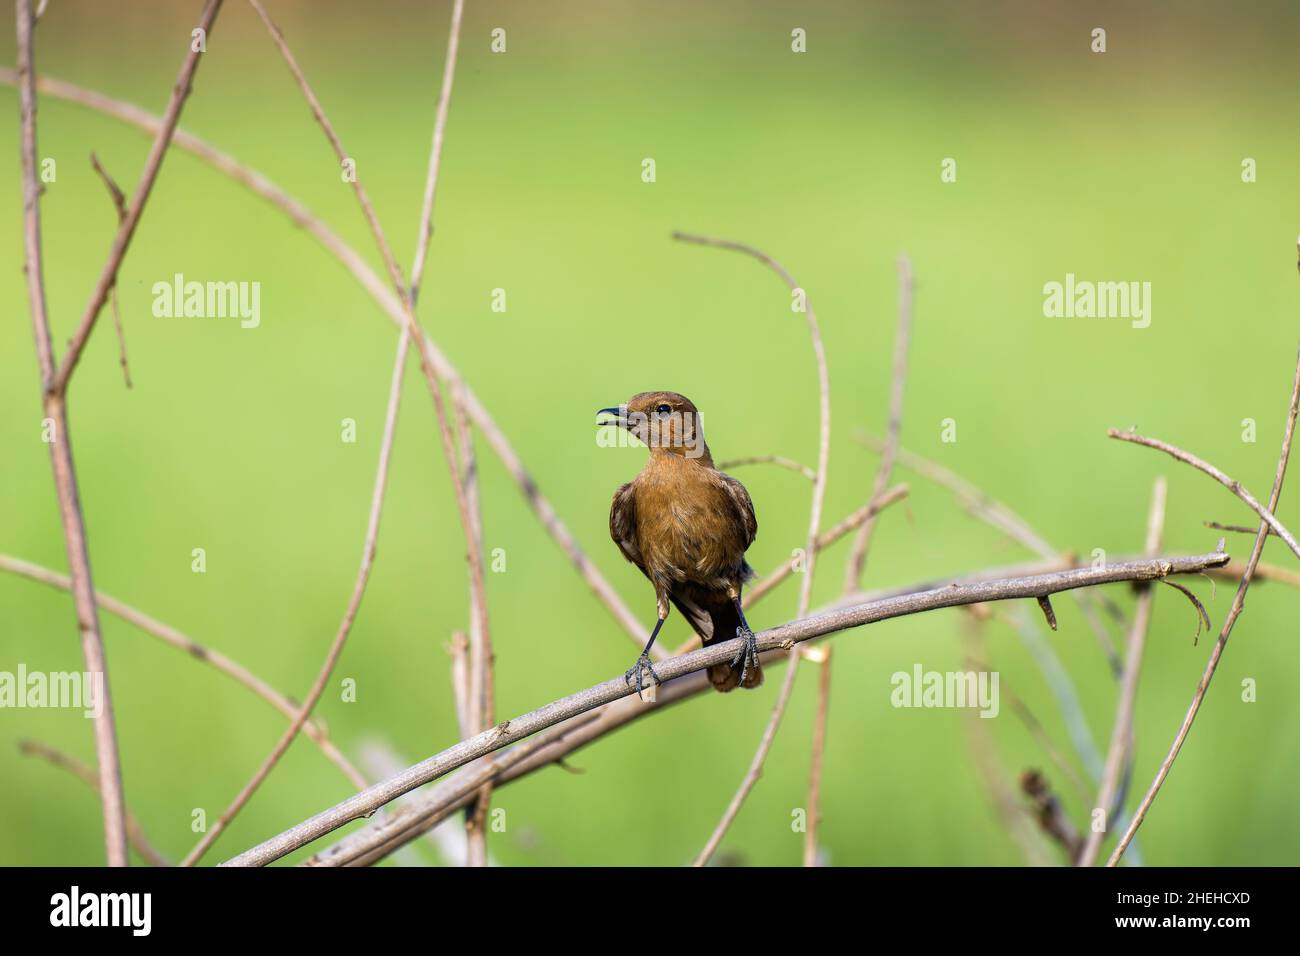 An adult Brown Rock Chat (Oenanthe fusca) bird perched in a garden Stock Photo